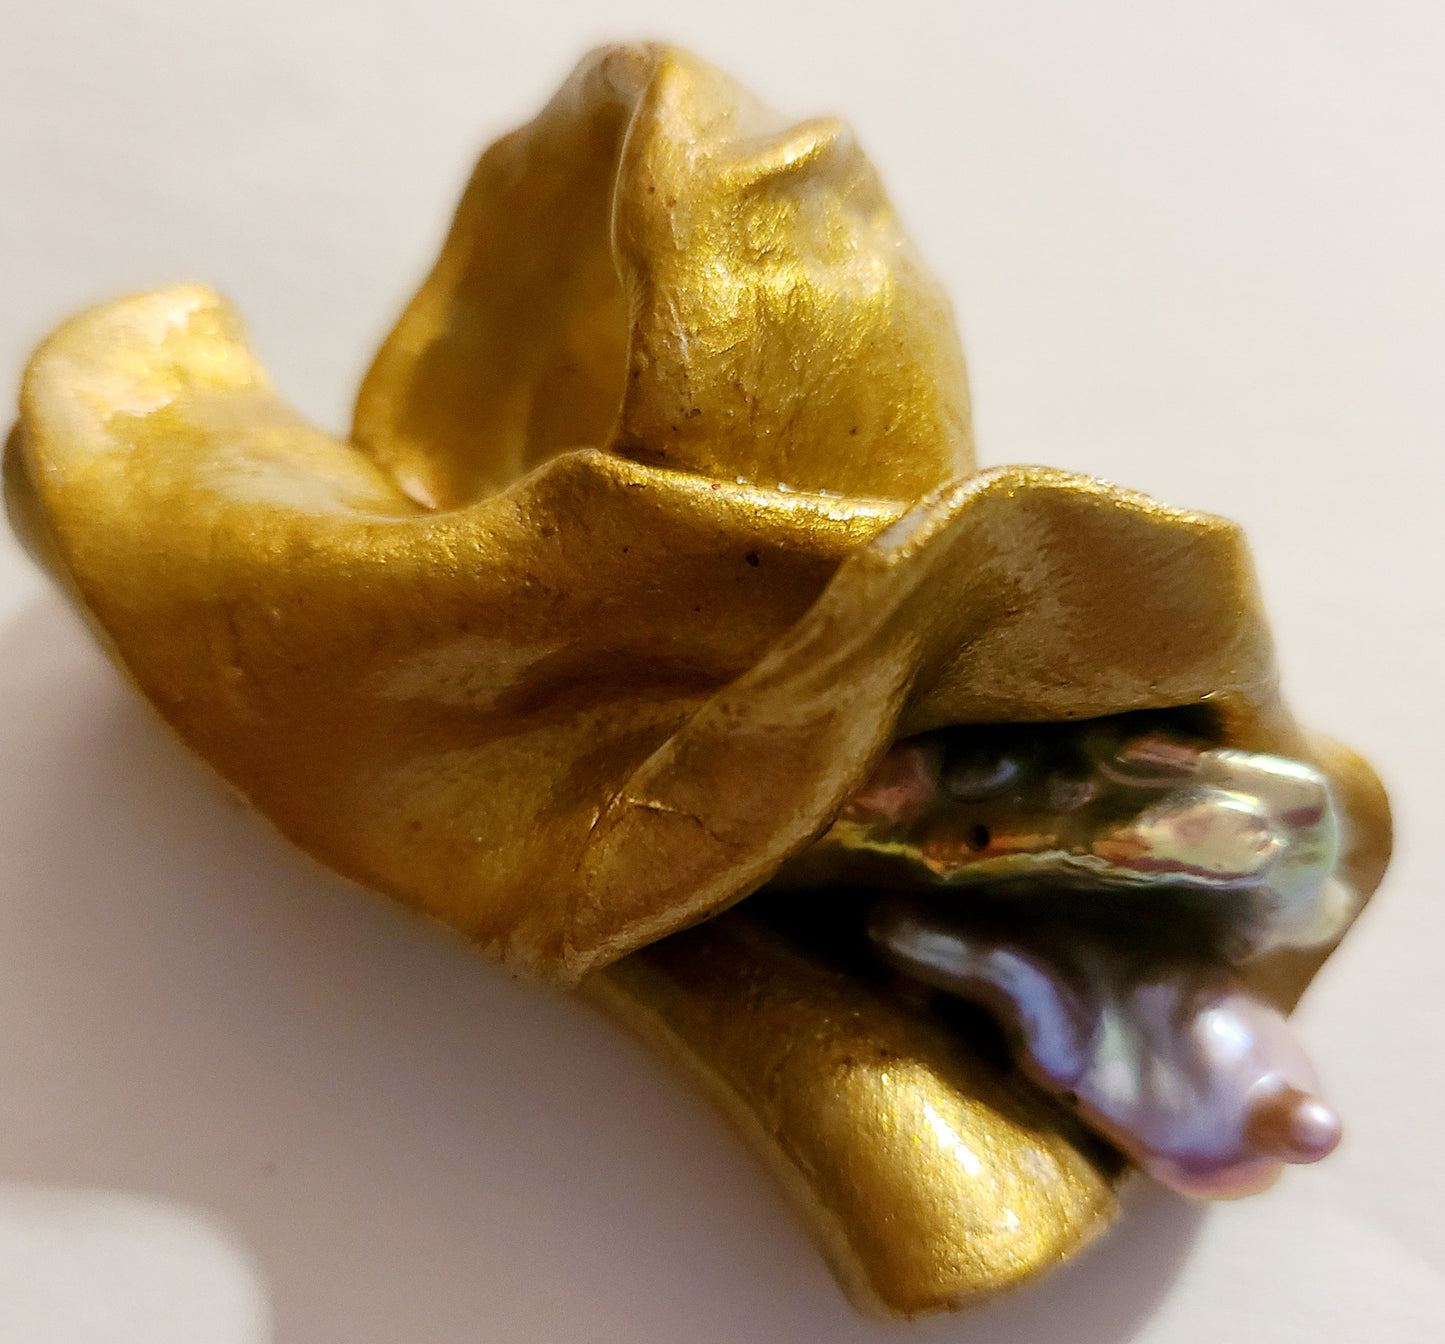 Gold Metallic Hand Sculpted Freshwater Pearl Statement Ring Size 7,  Sensuous Organic Yoni Ring, OOAK Wearable Art Finger Candy